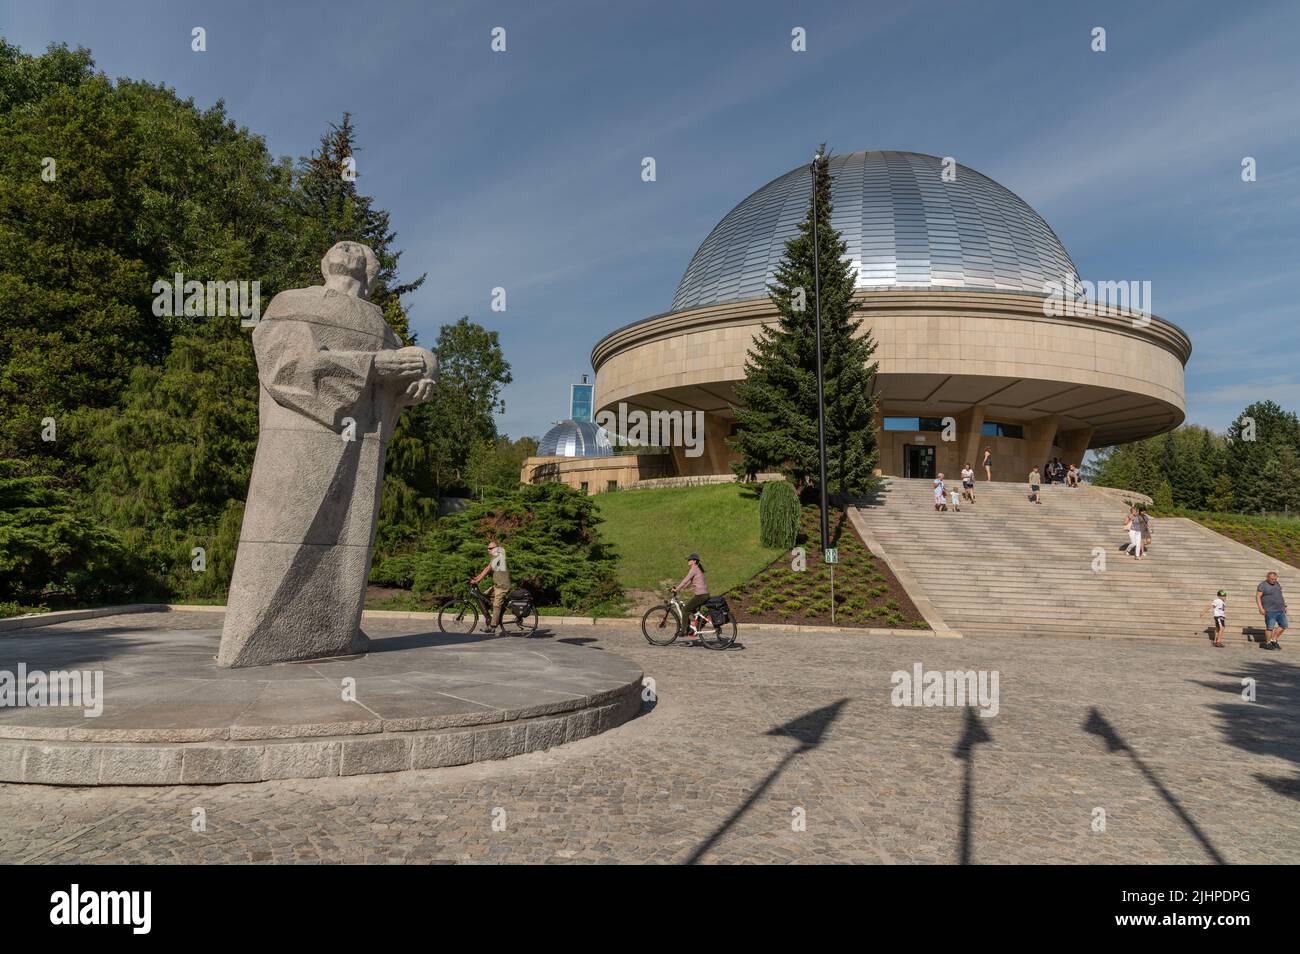 Chorzow, Silesia, Poland; July 18th, 2022: Planetarium - astronomical observatory complex in Silesia Park after total renovation Stock Photo